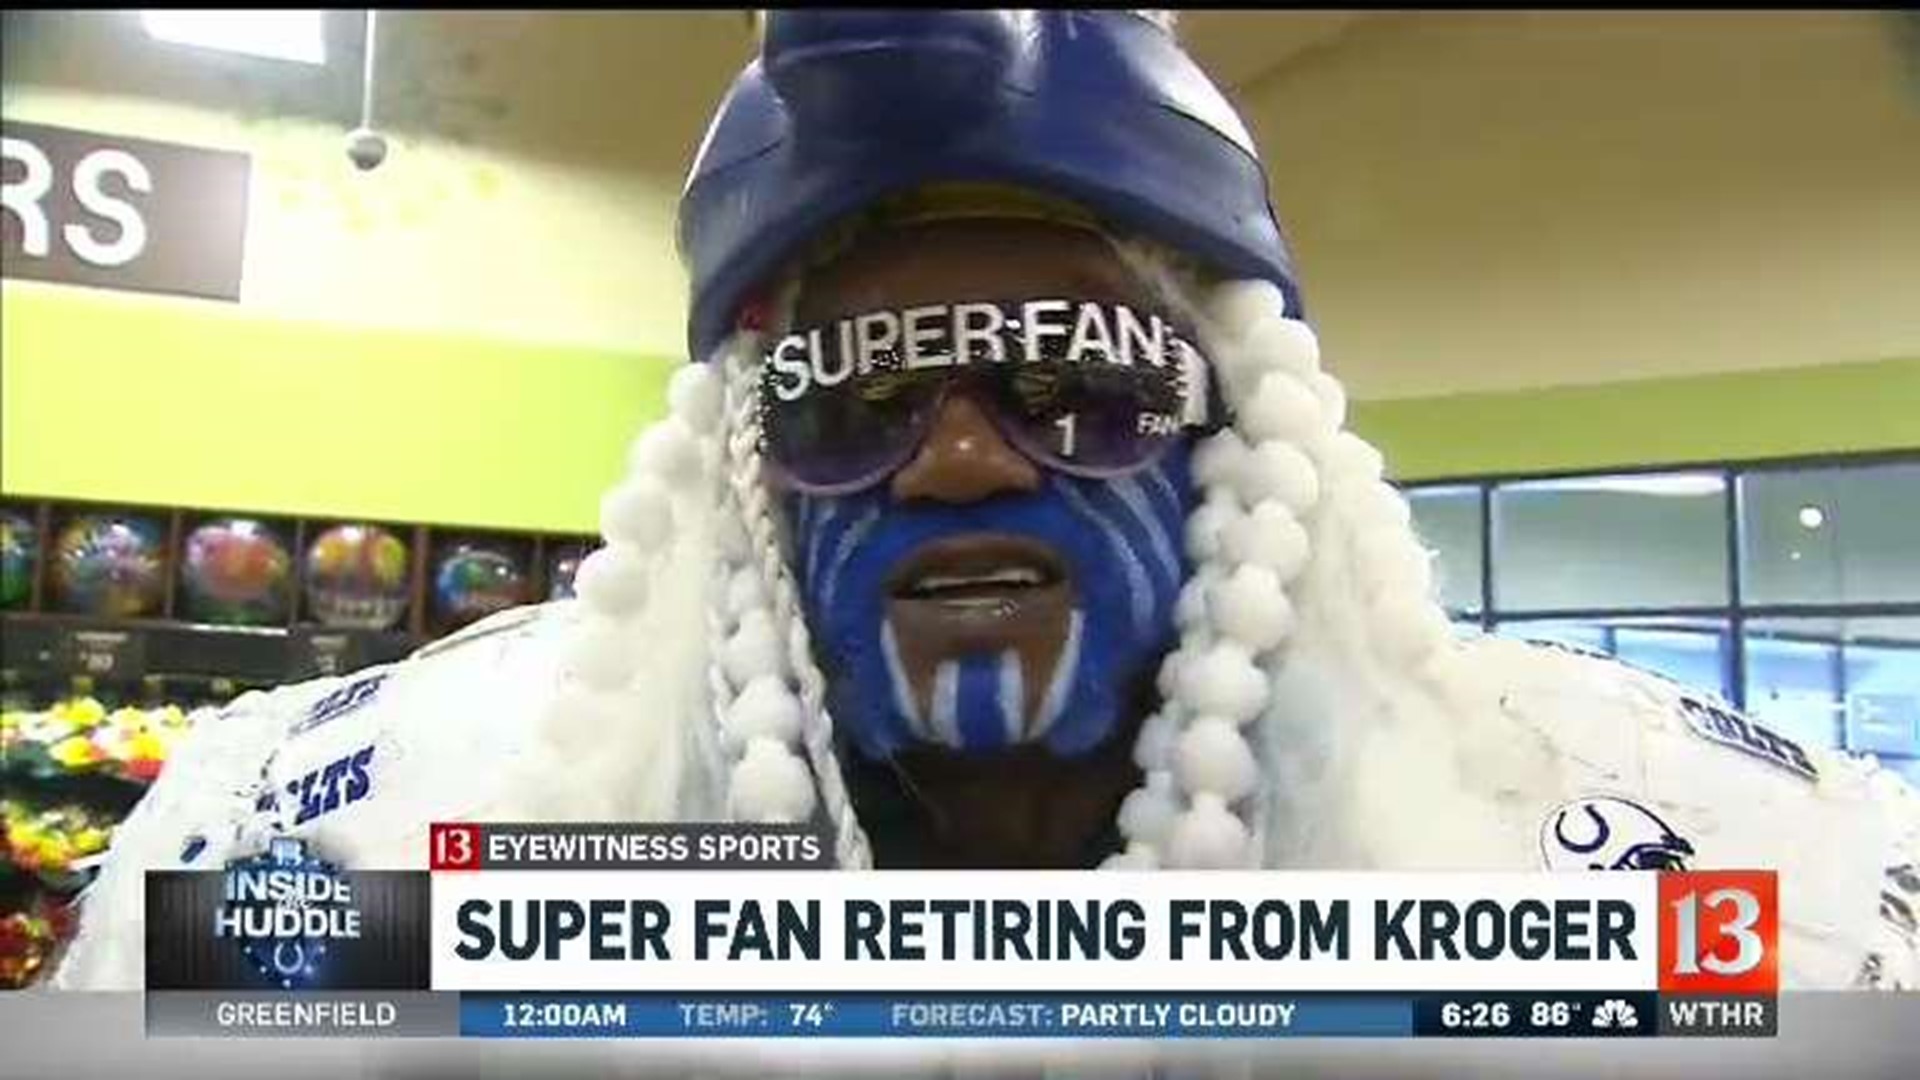 Super Fan is retiring from his day job